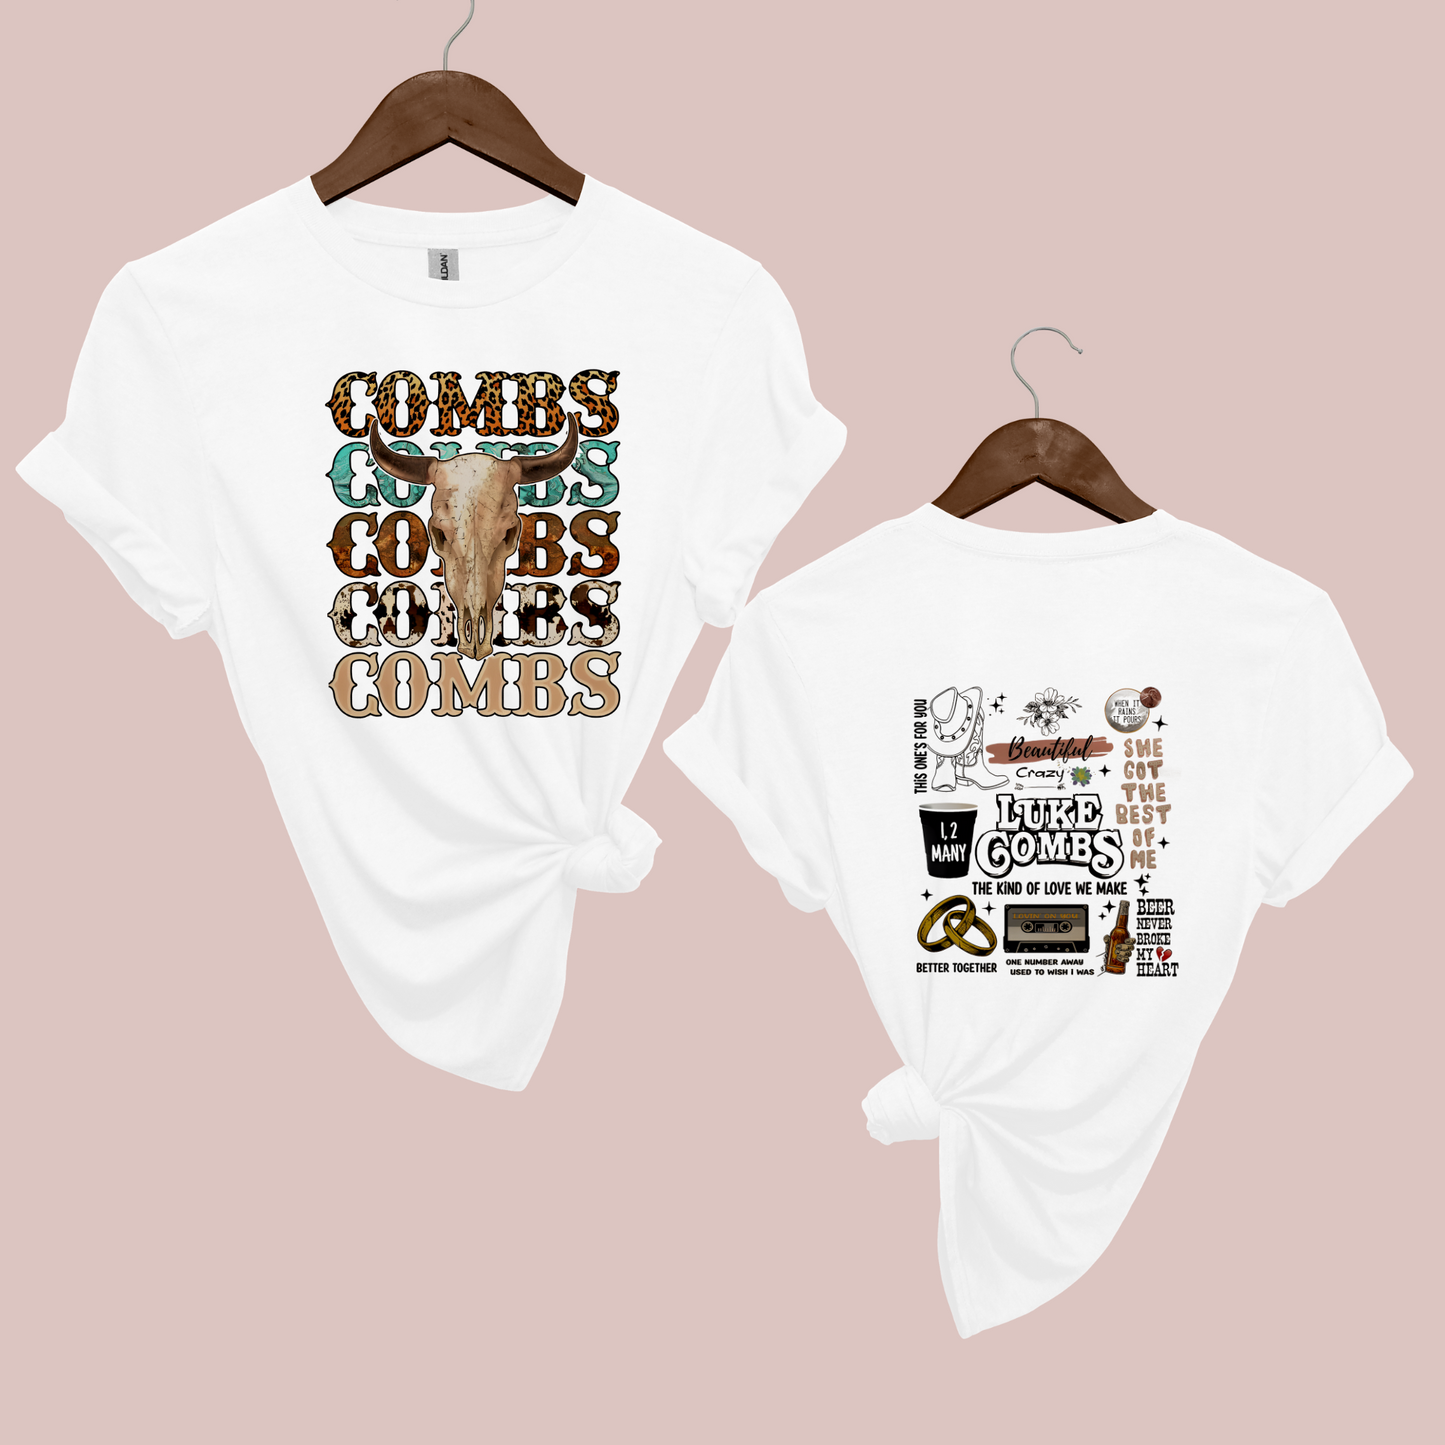 Luke Combs Full Front and Back Graphic T Shirt White